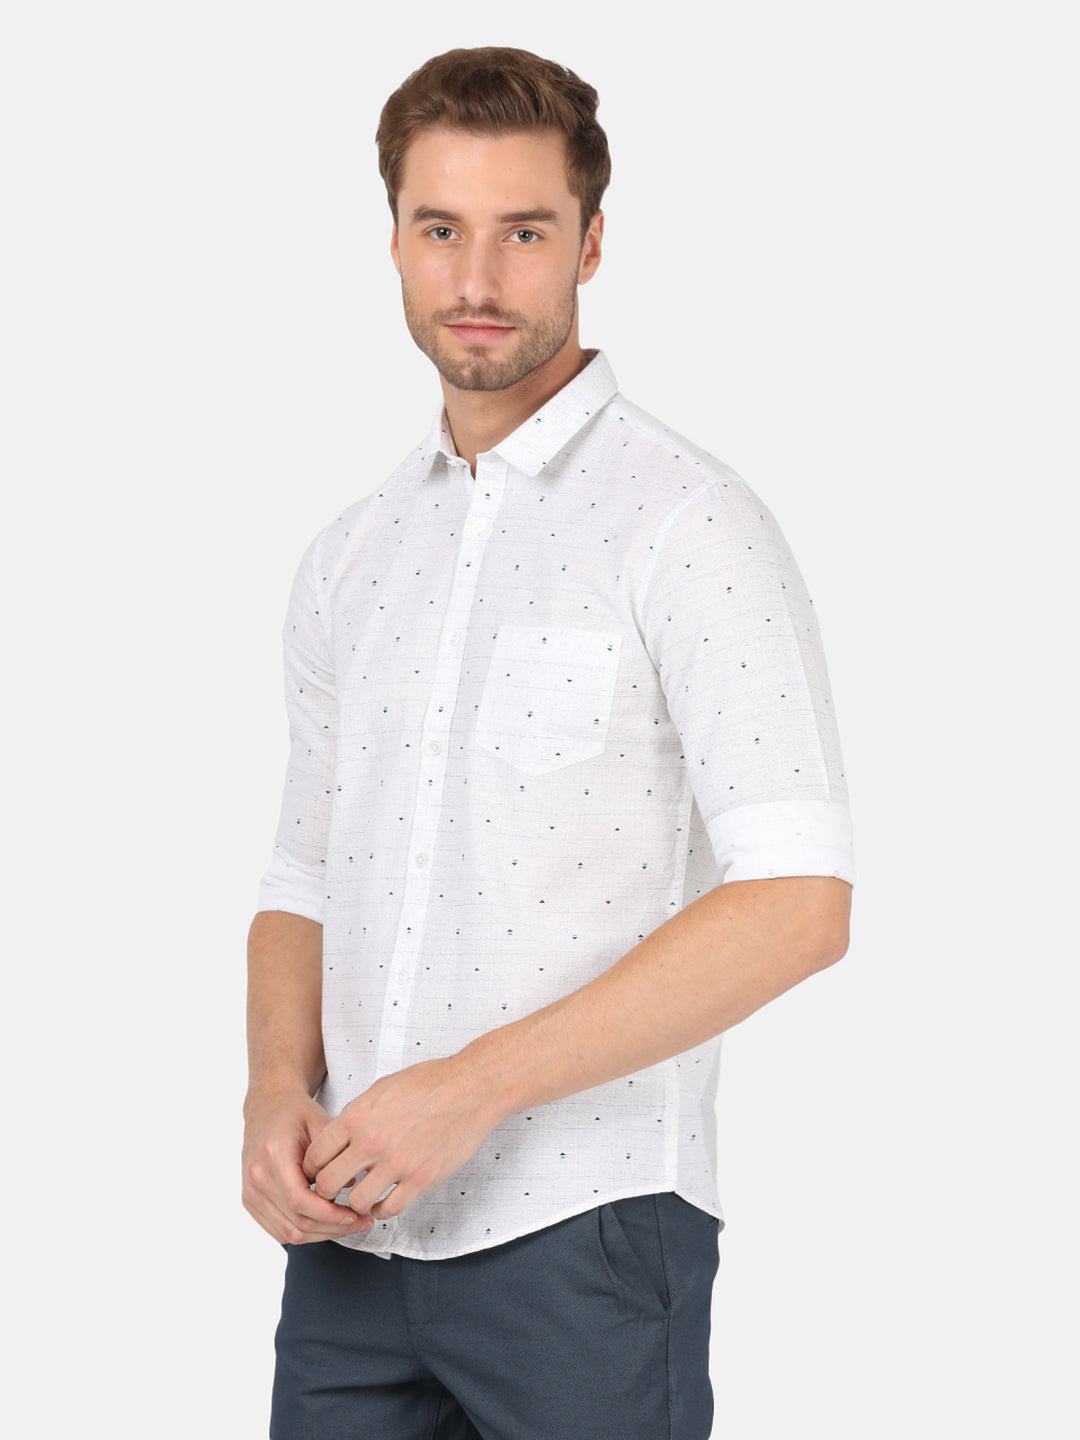 Casual Full Sleeve Slim Fit Printed White with Collar Shirt for Men